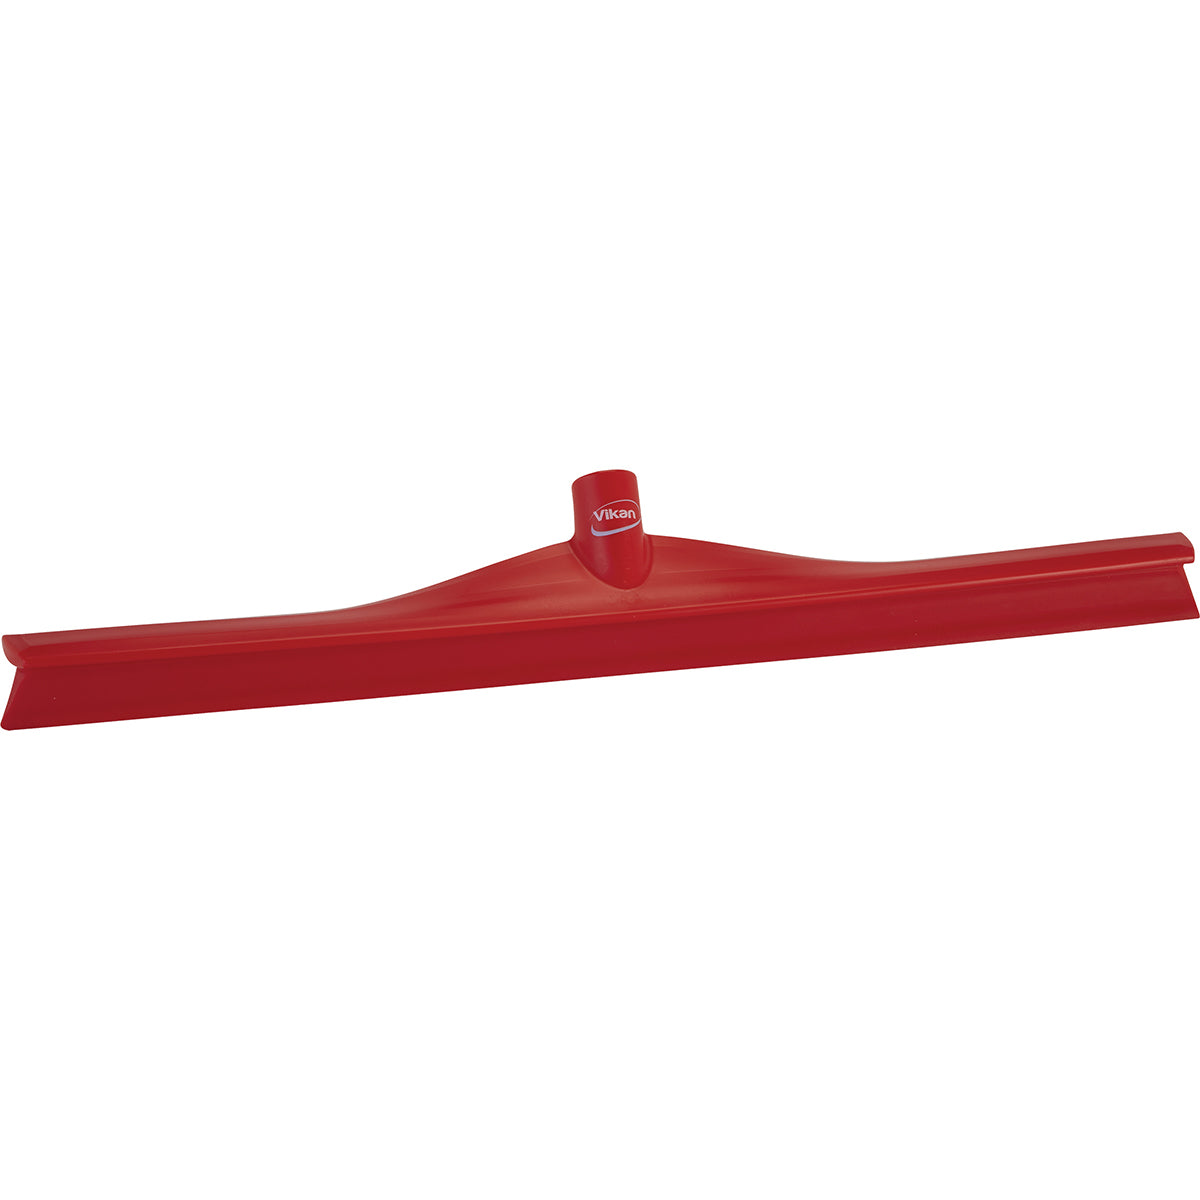 Silicone Pan Squeegee Sweep Squeegee Squeegee, Cooking Baking Squeegee  Cleaning Squeegee Silicone Clean Tool for Cooking Kitchen Red 